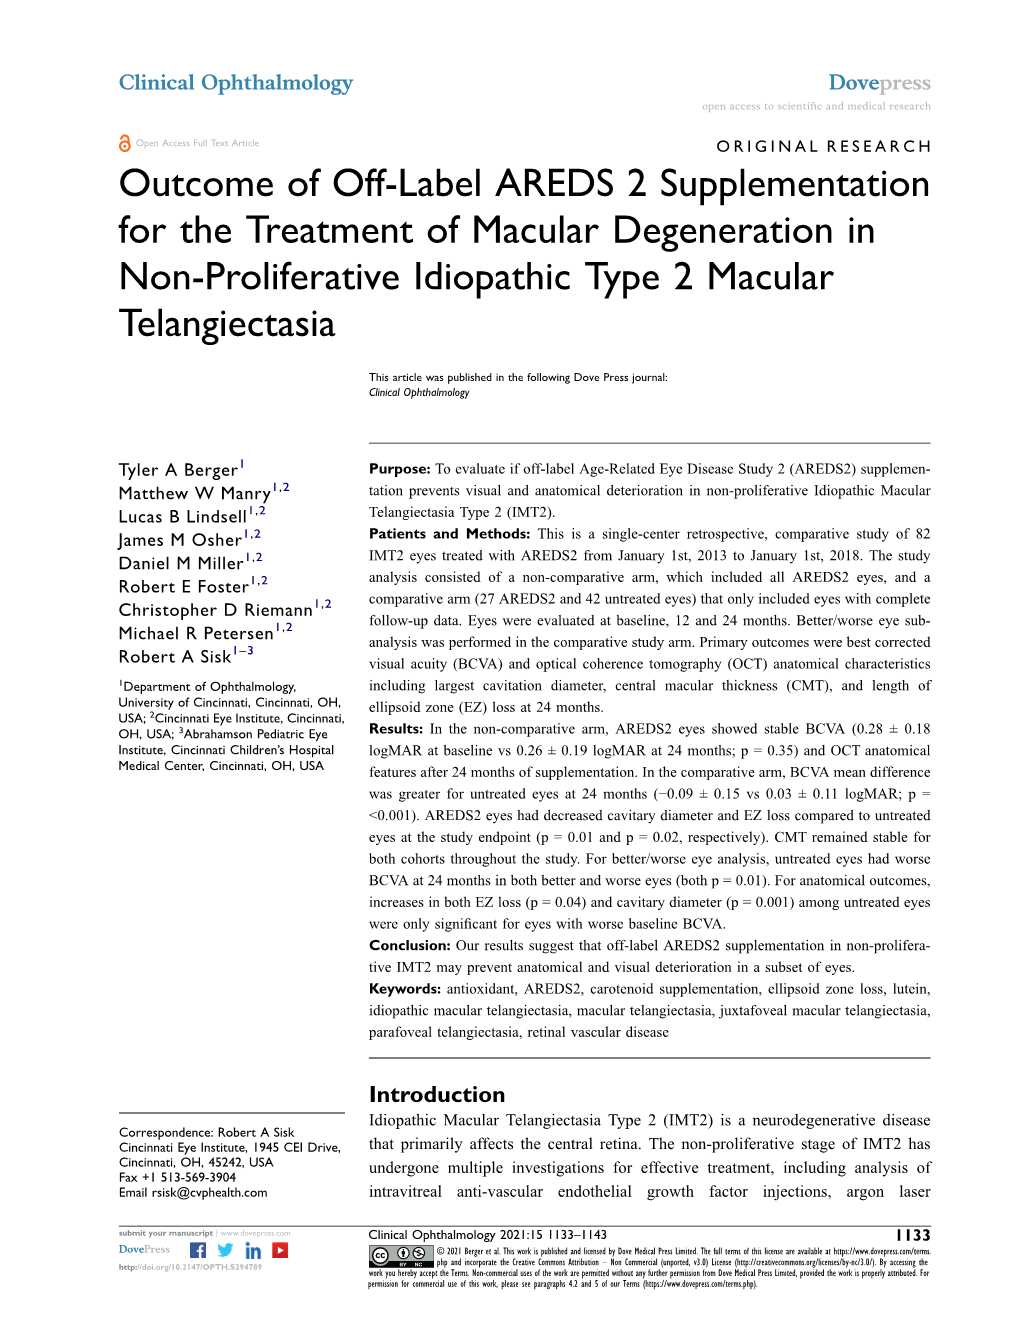 Outcome of Off-Label AREDS 2 Supplementation for the Treatment of Macular Degeneration in Non-Proliferative Idiopathic Type 2 Macular Telangiectasia